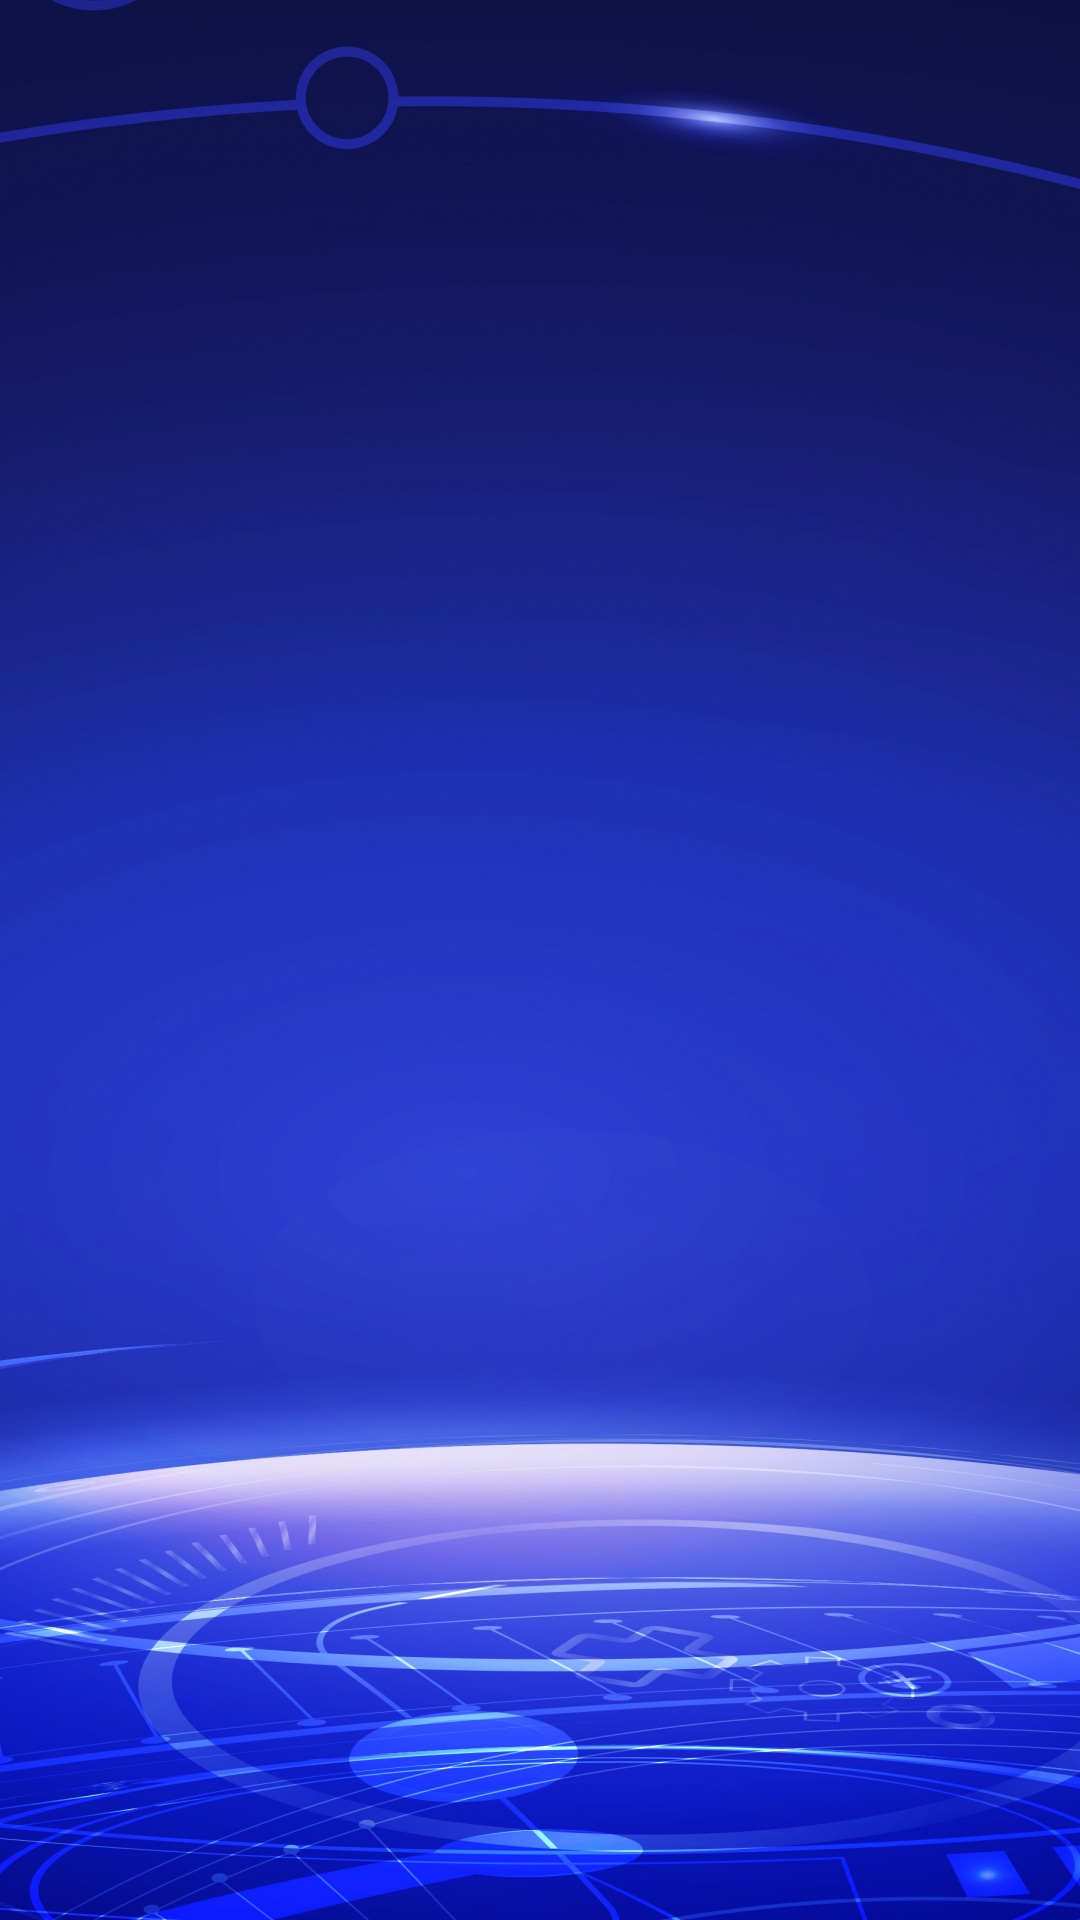 Blue and White Line Illustration. Wallpaper in 1080x1920 Resolution